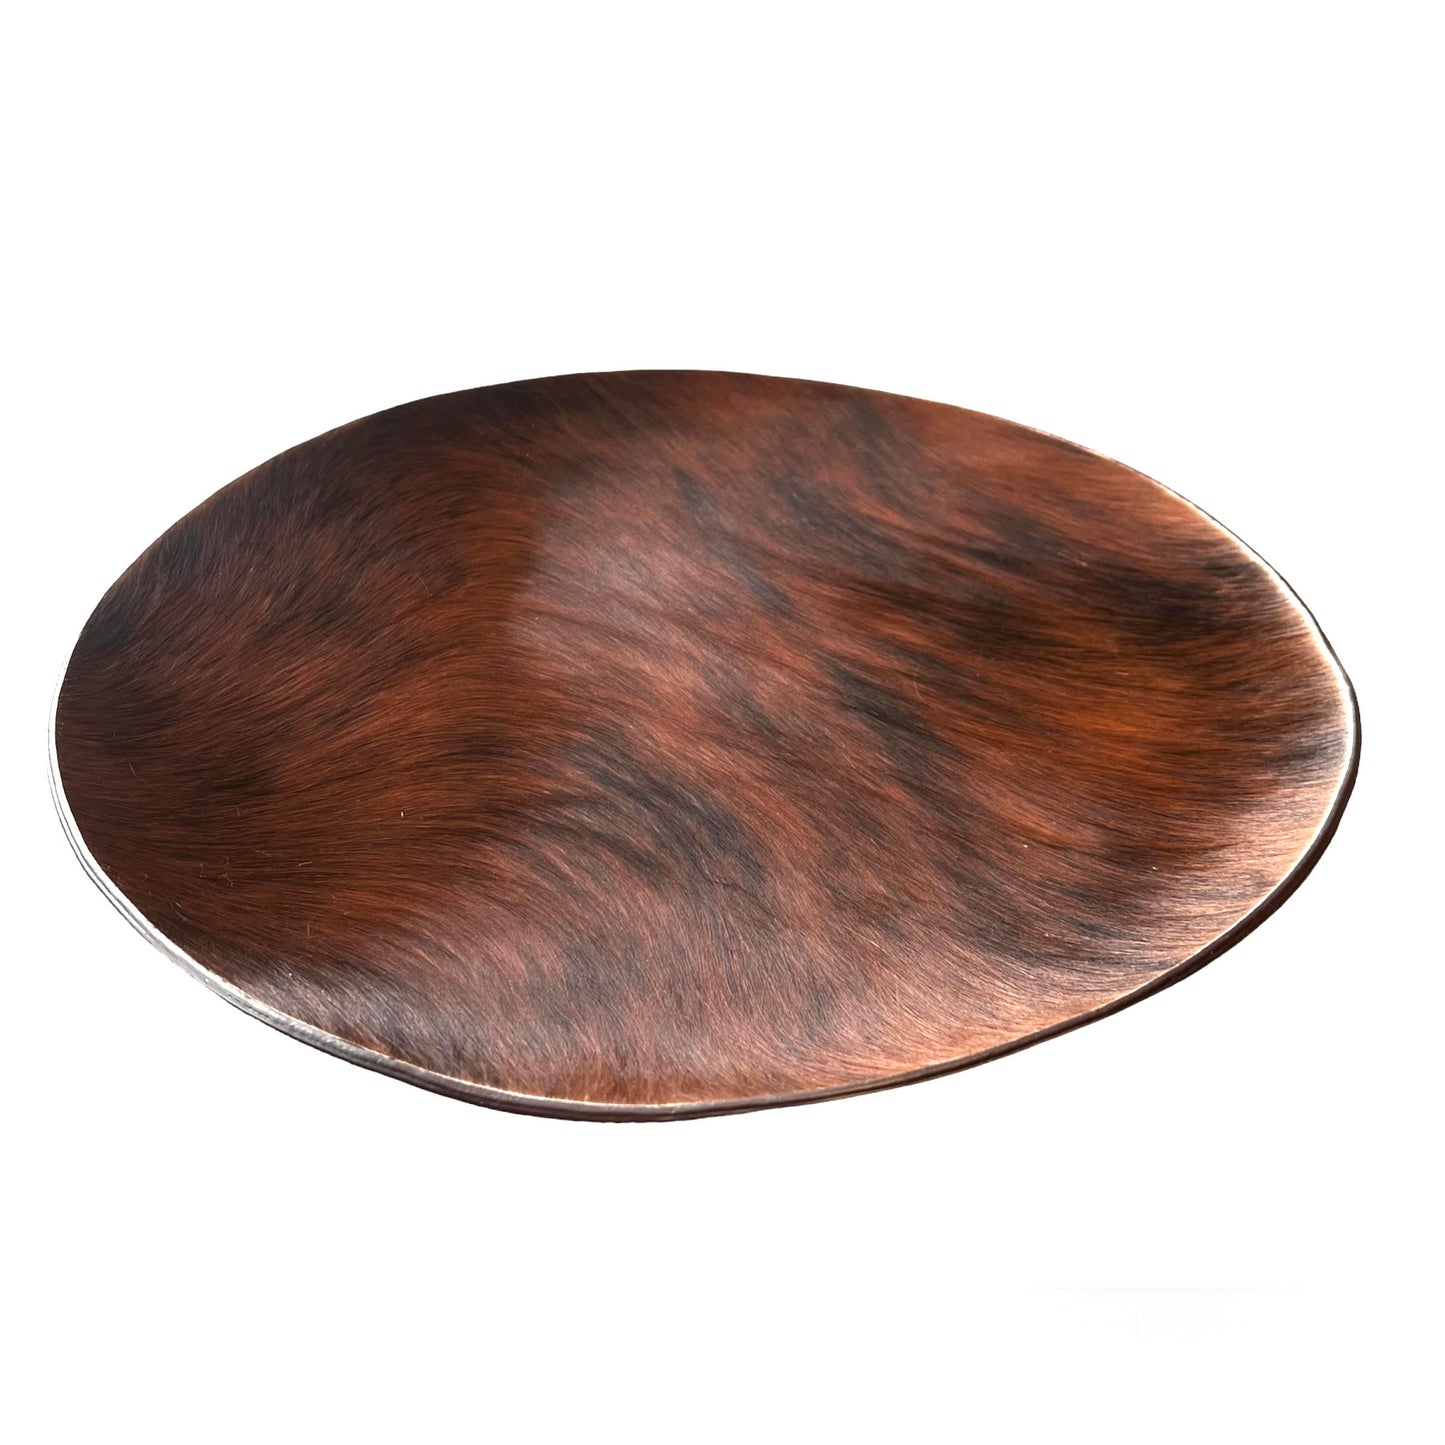 LIMITED EDITION COWHIDE BOWL M